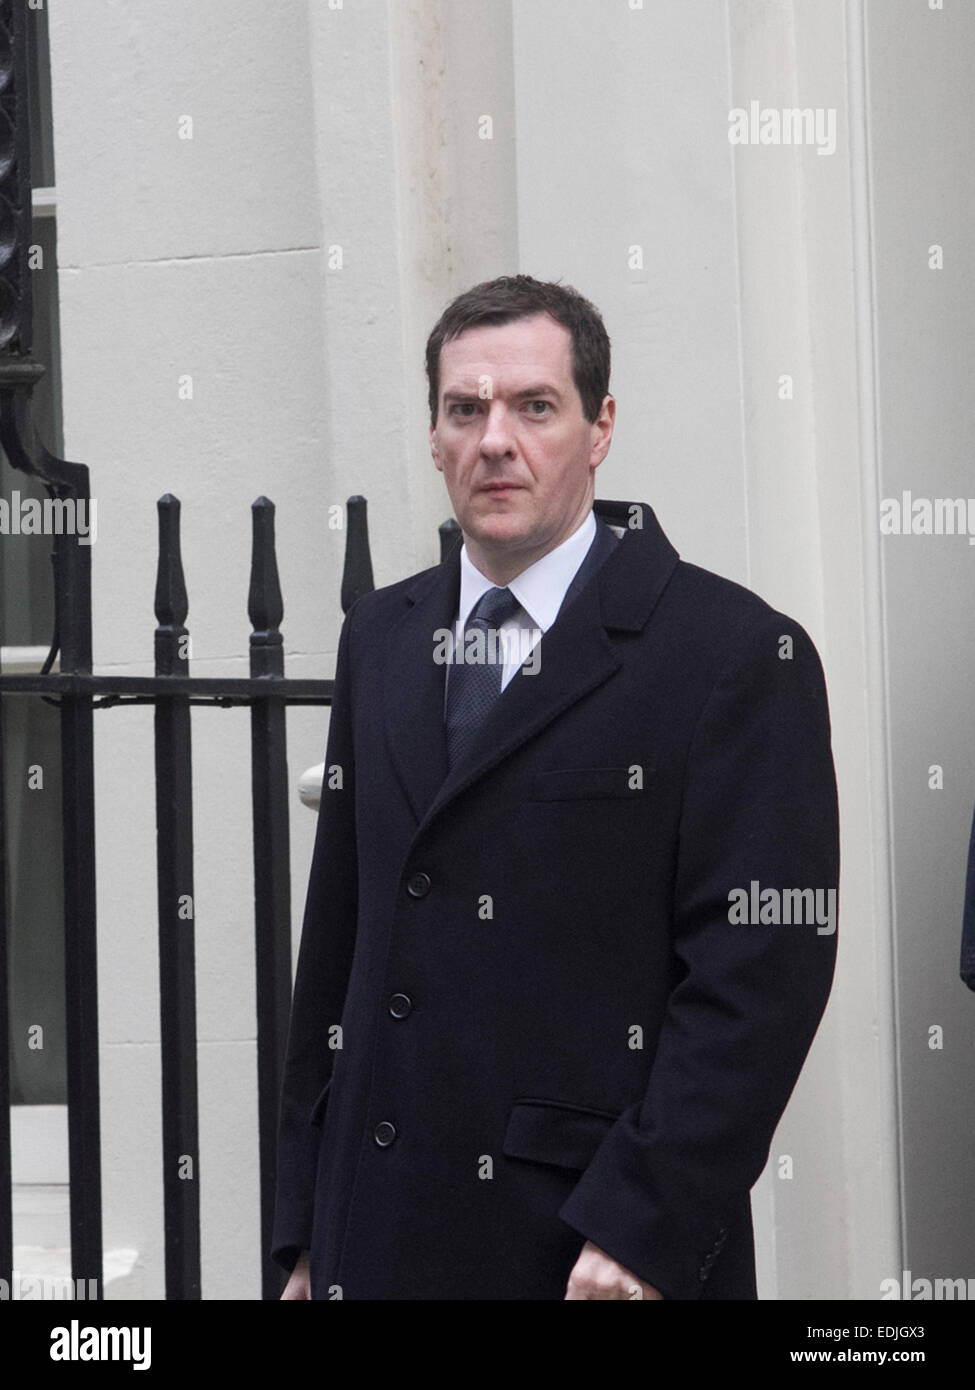 Westminster, London, UK. 7th January, 2015. Chancellor of the Exchequer George Osborne leaves Downing Street for the weekly PMQ at the Houses of Commons in Parliament. Credit:  amer ghazzal/Alamy Live News Stock Photo